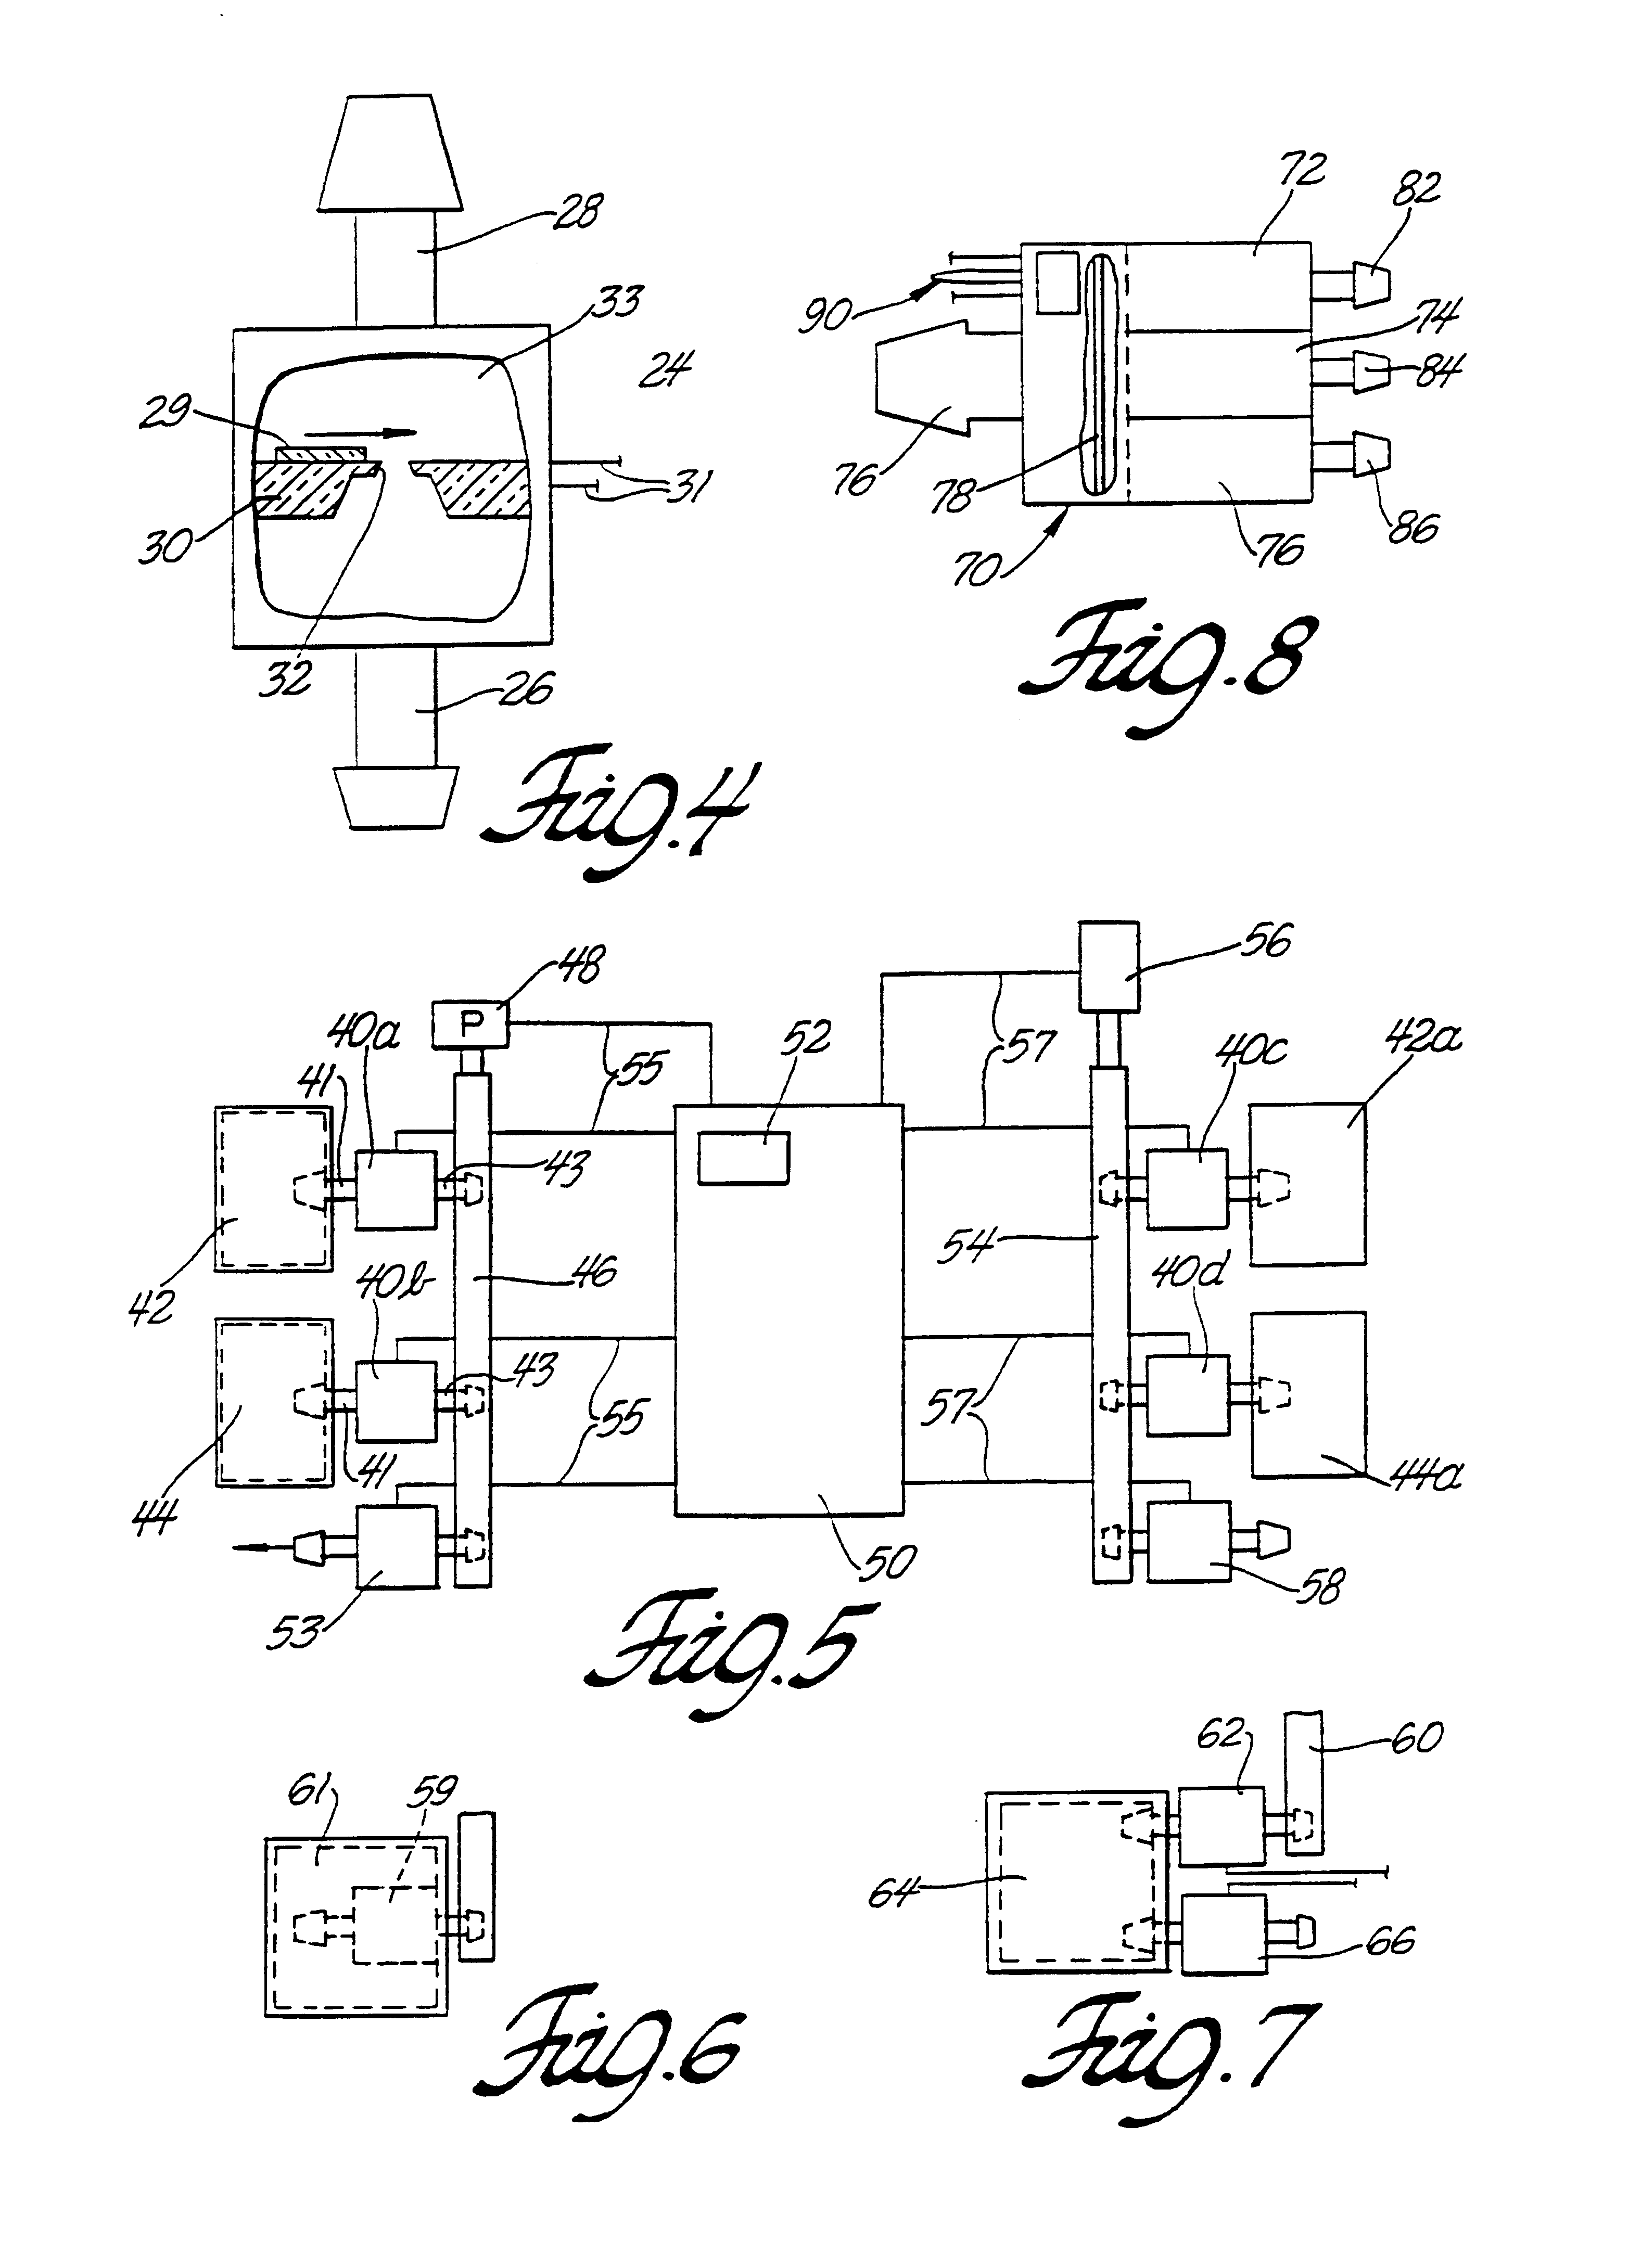 Microvalve controller for pneumatically contoured support